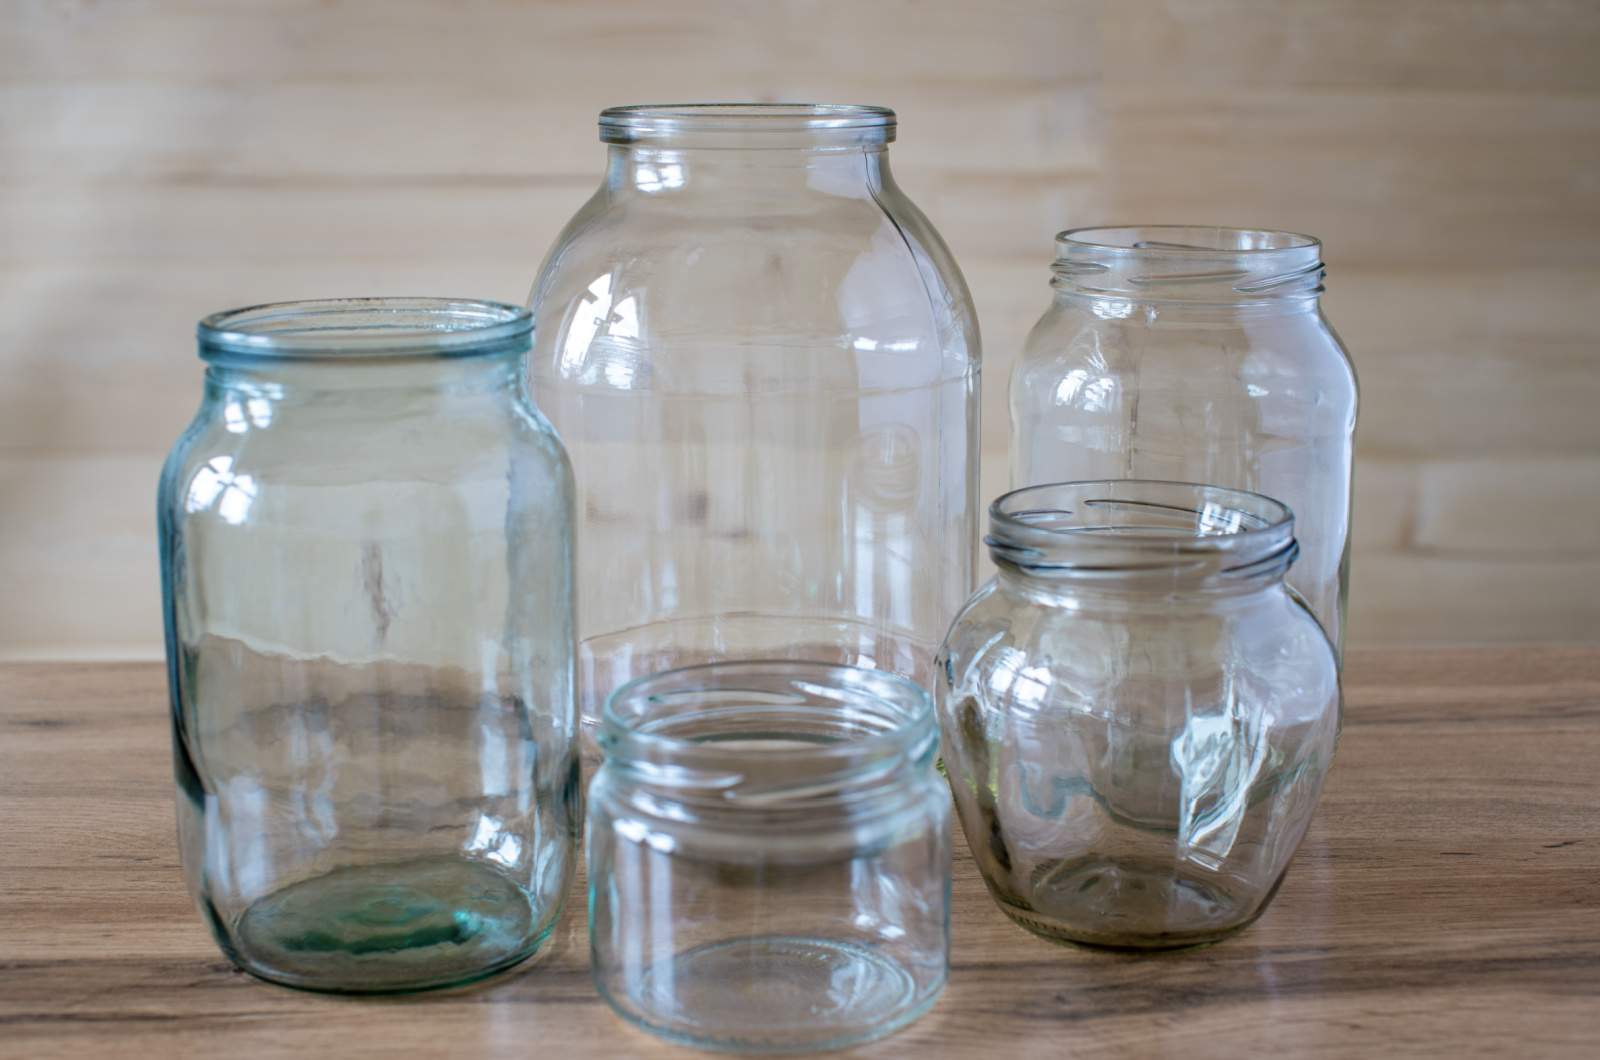 Glass jars of different sizes and volumes on the wooden table